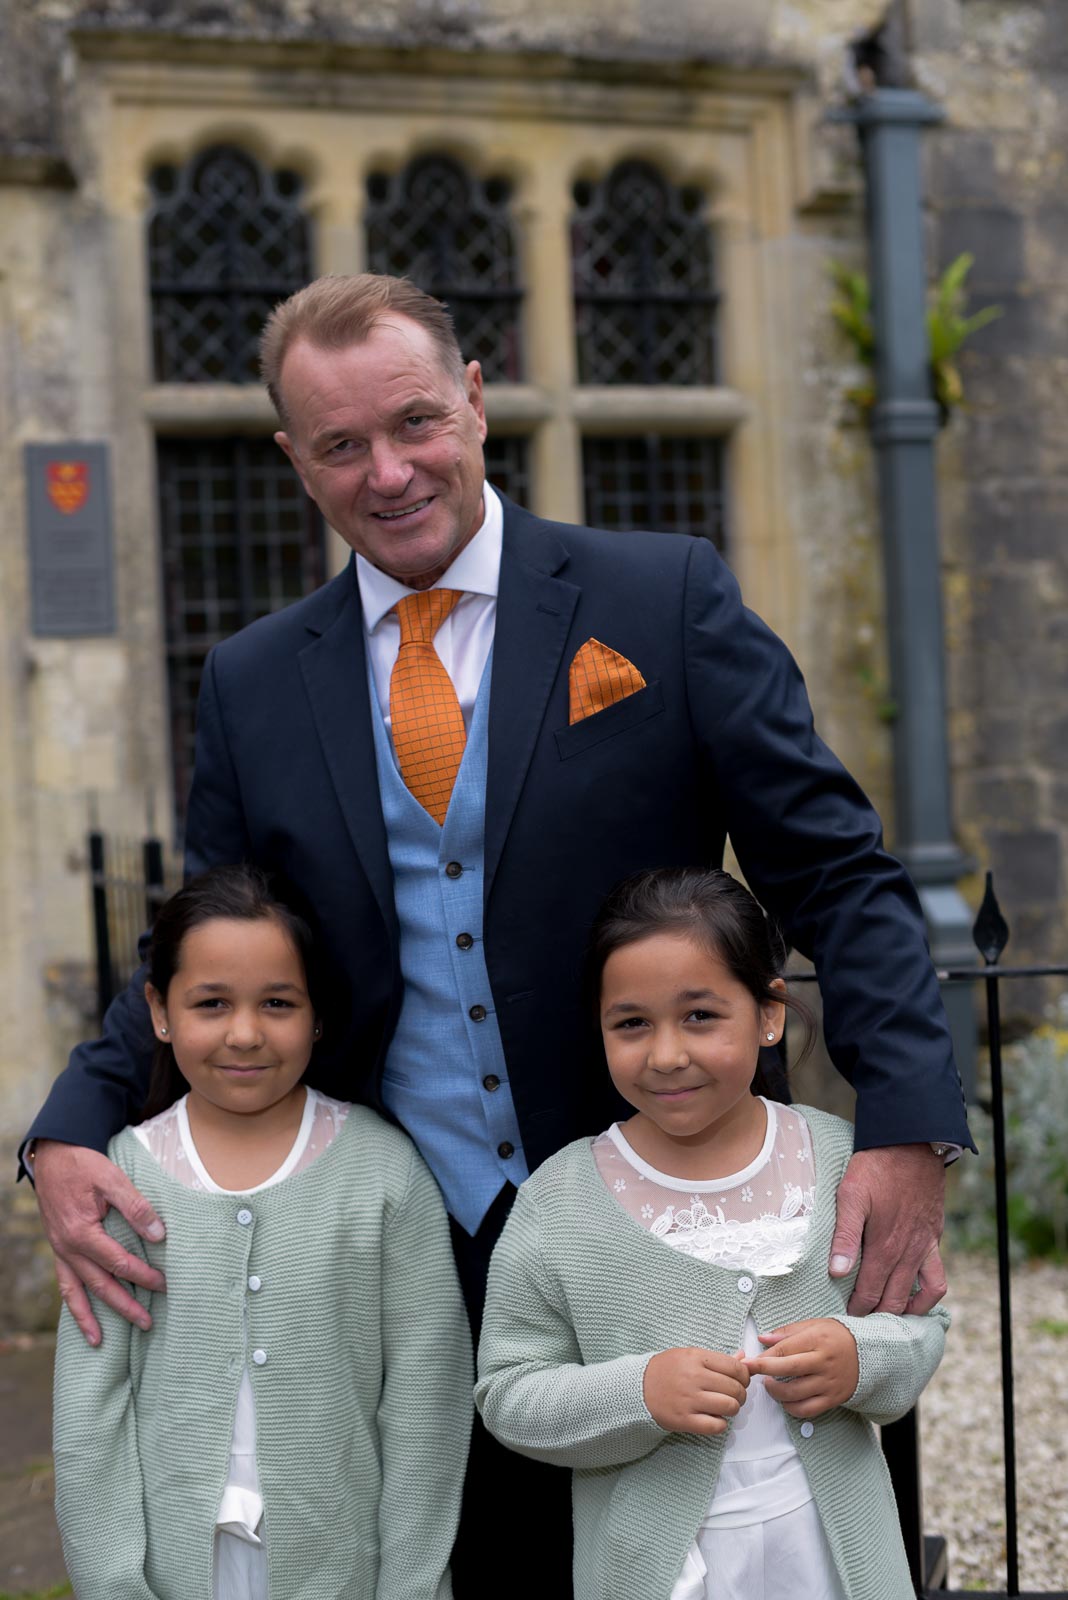 Martin poses with his twin seven year old grand daughters at the front entrance of Lewes Register Office before his wedding to Joanne.